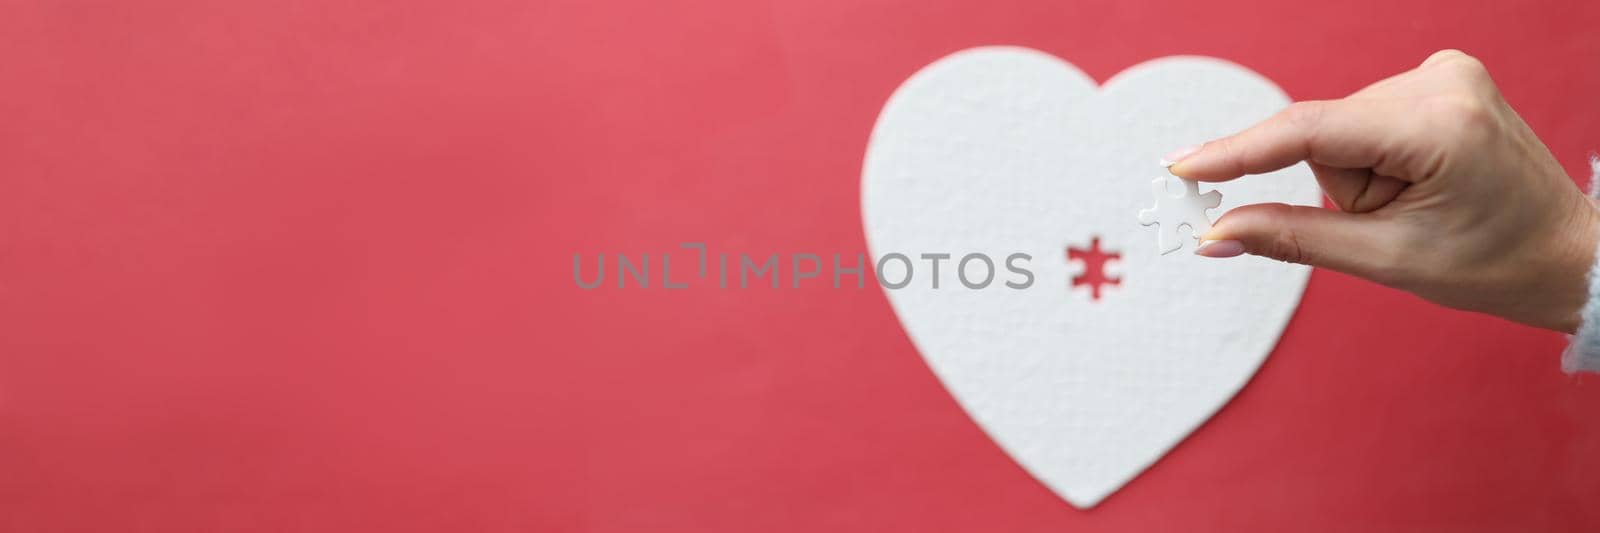 Top view of female hand holding missing piece of heart puzzle jigsaw. Love relationships concept. Copy space on left side. Isolated on pink background